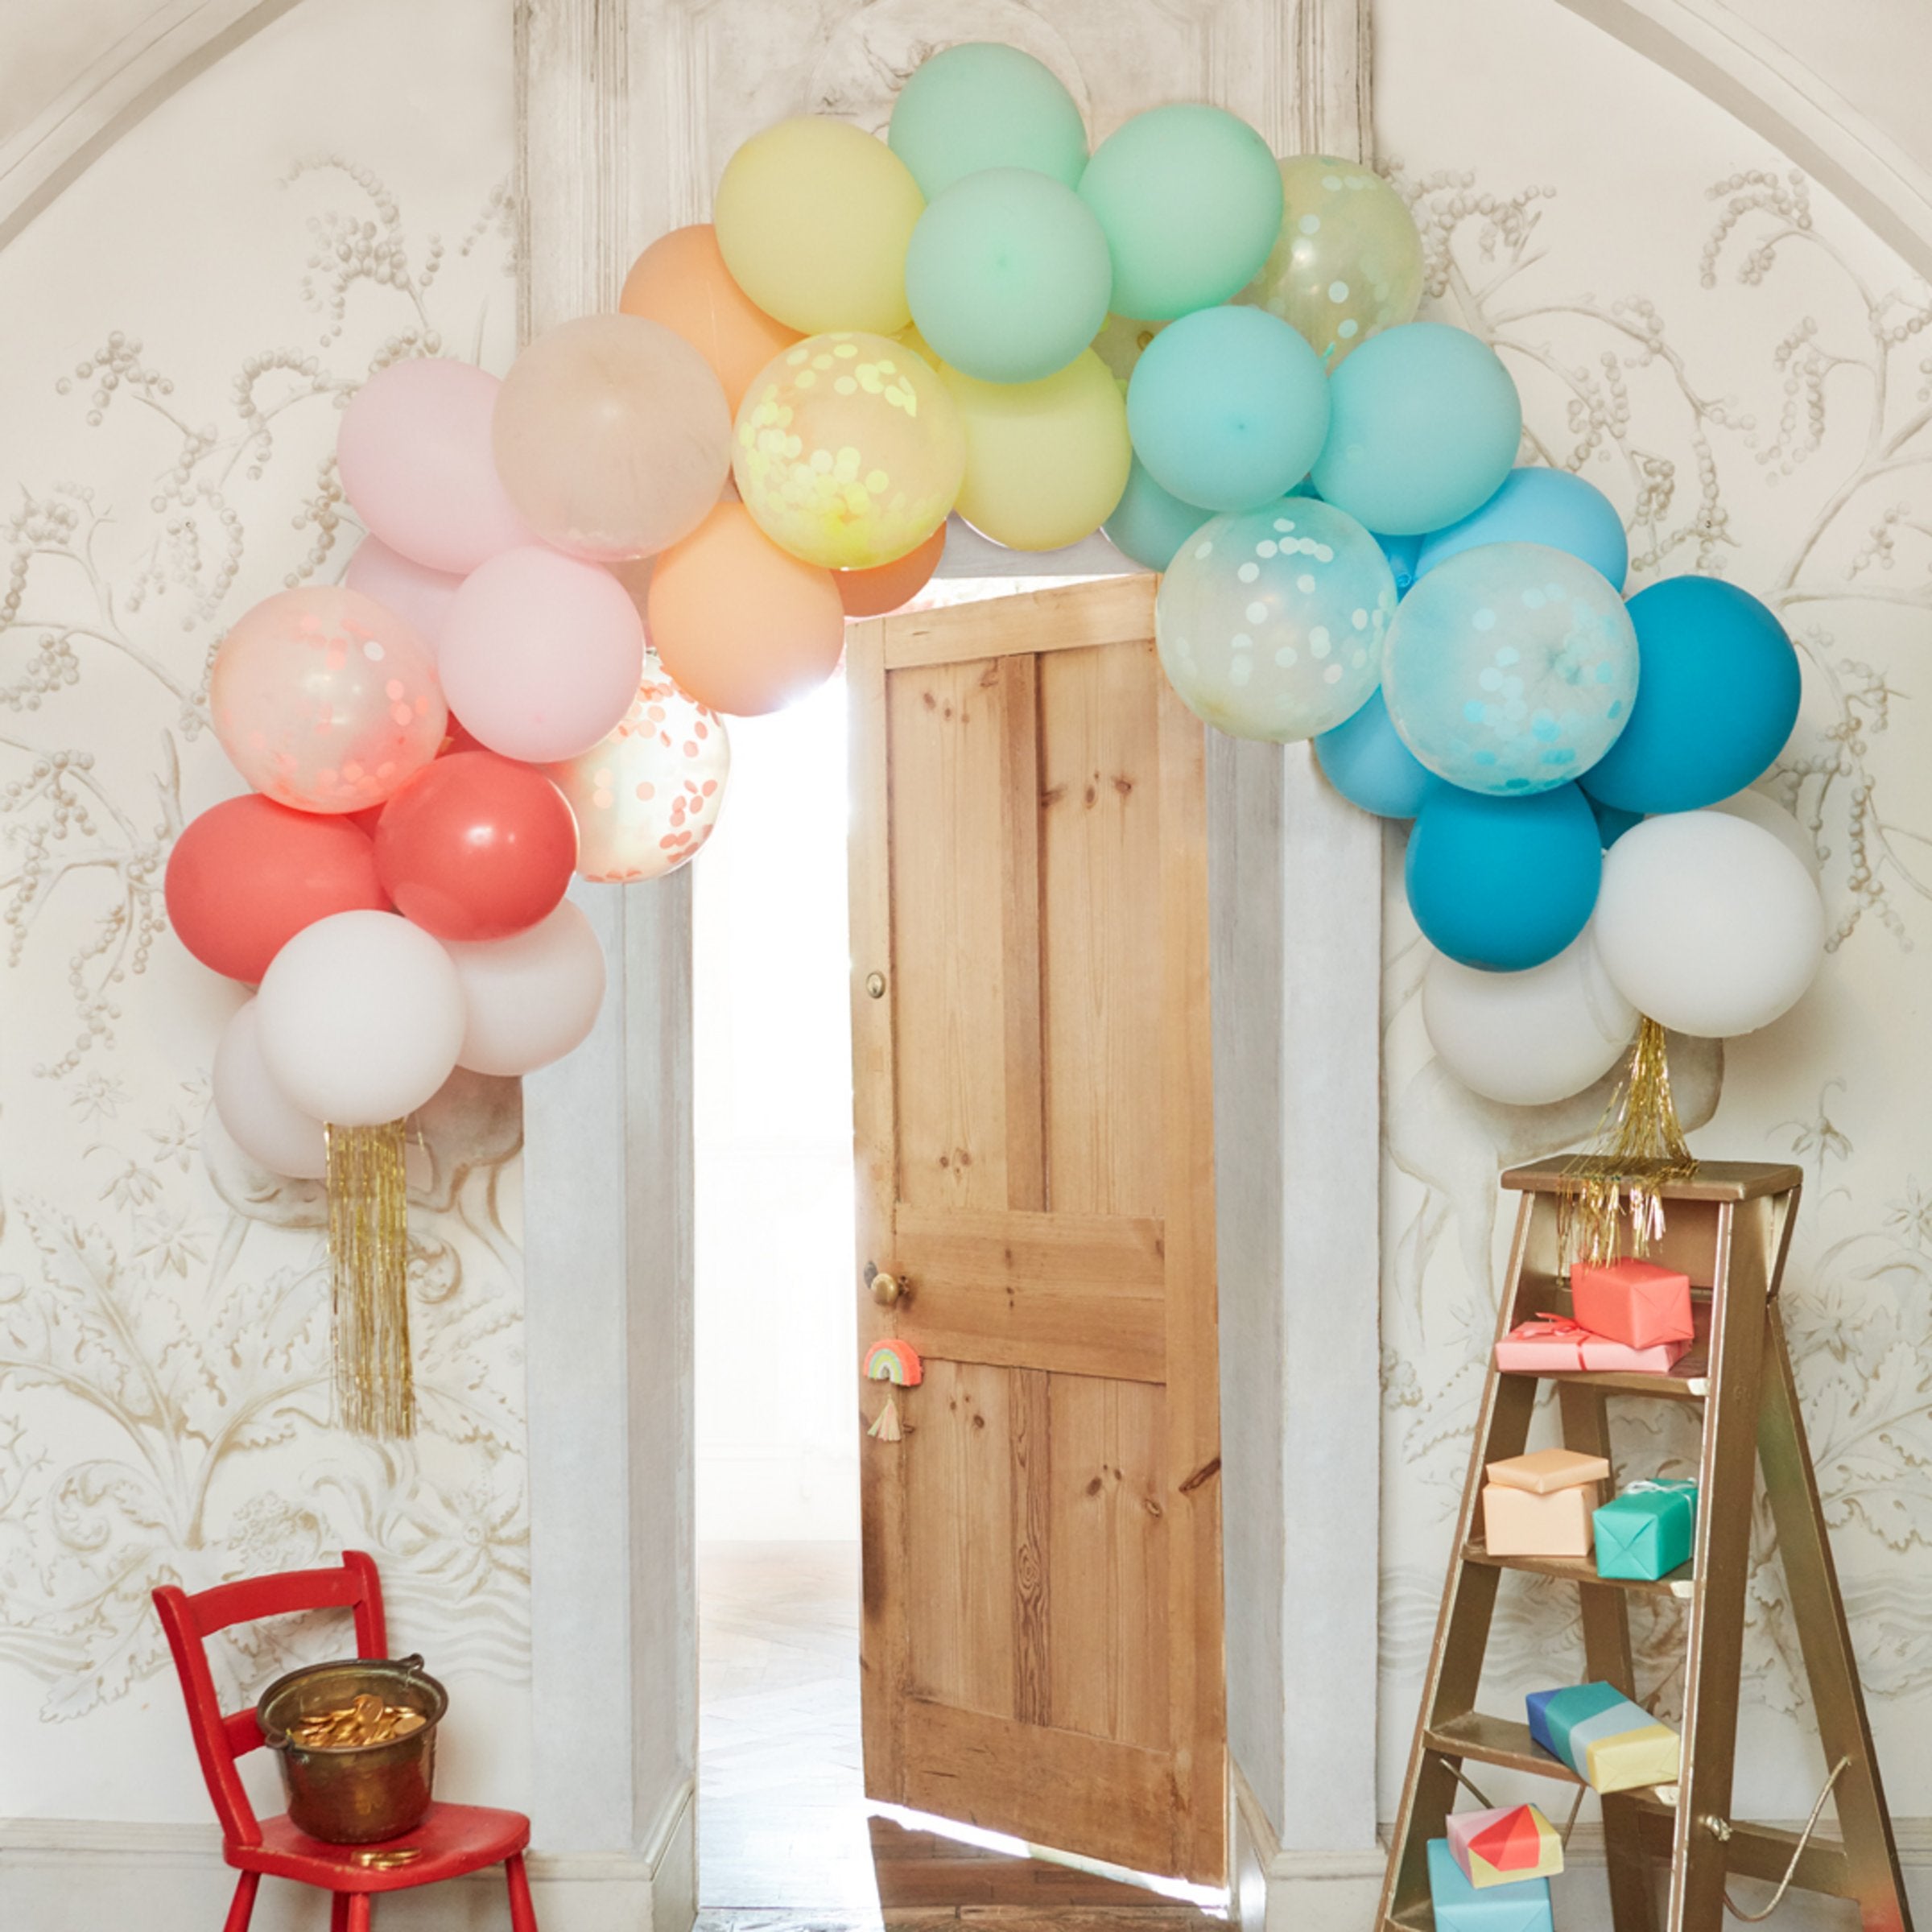 This wonderful arch includes 40 balloons, 10 of which are pre-filled with confetti, and elegant golden streamer tassels